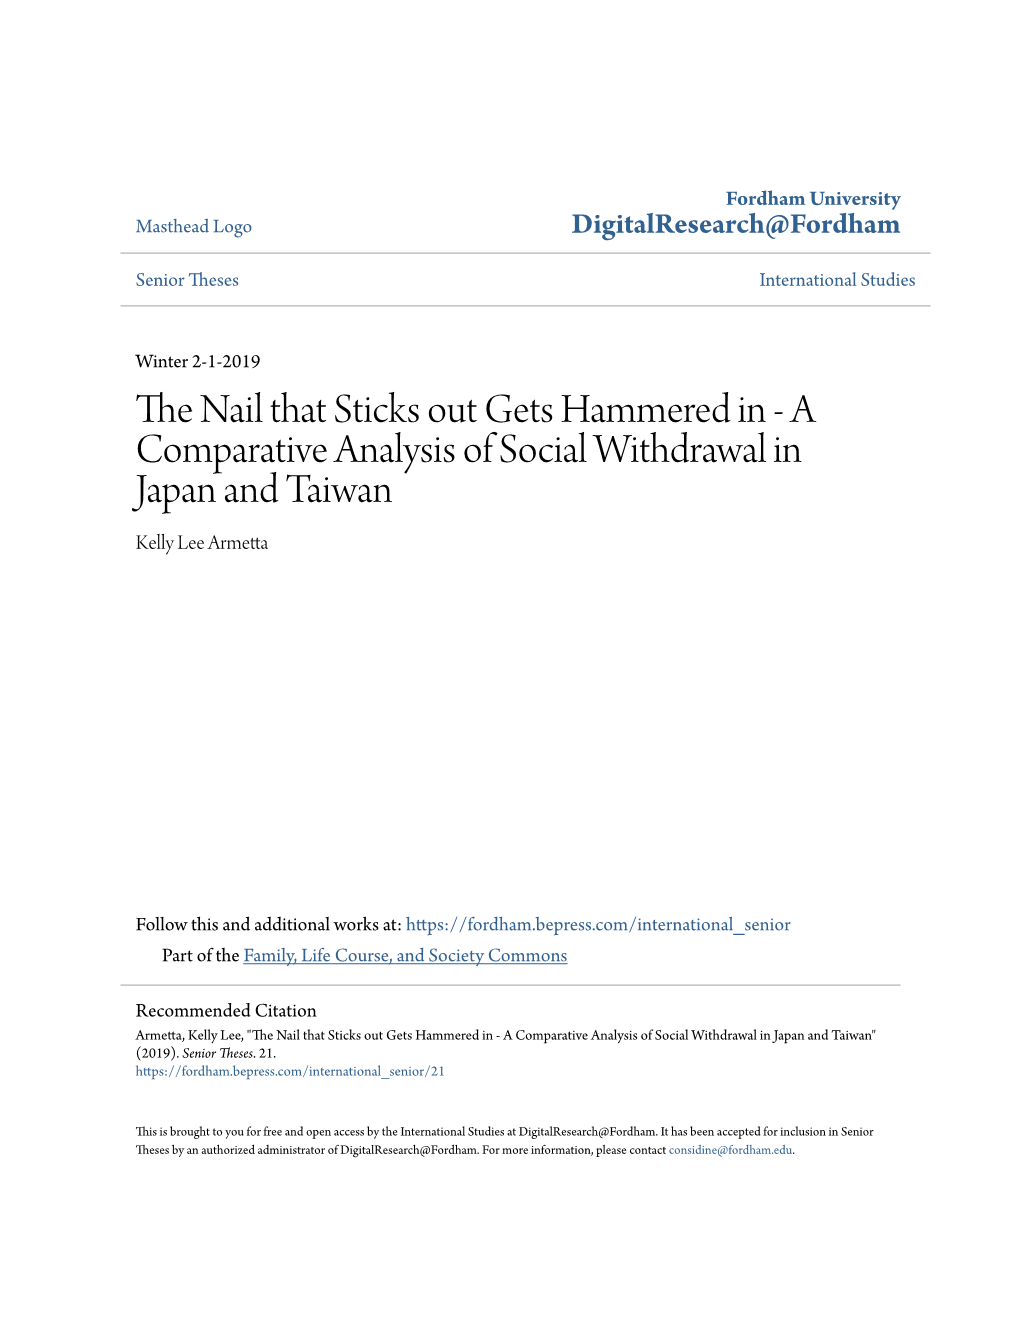 A Comparative Analysis of Social Withdrawal in Japan and Taiwan Kelly Lee Armetta